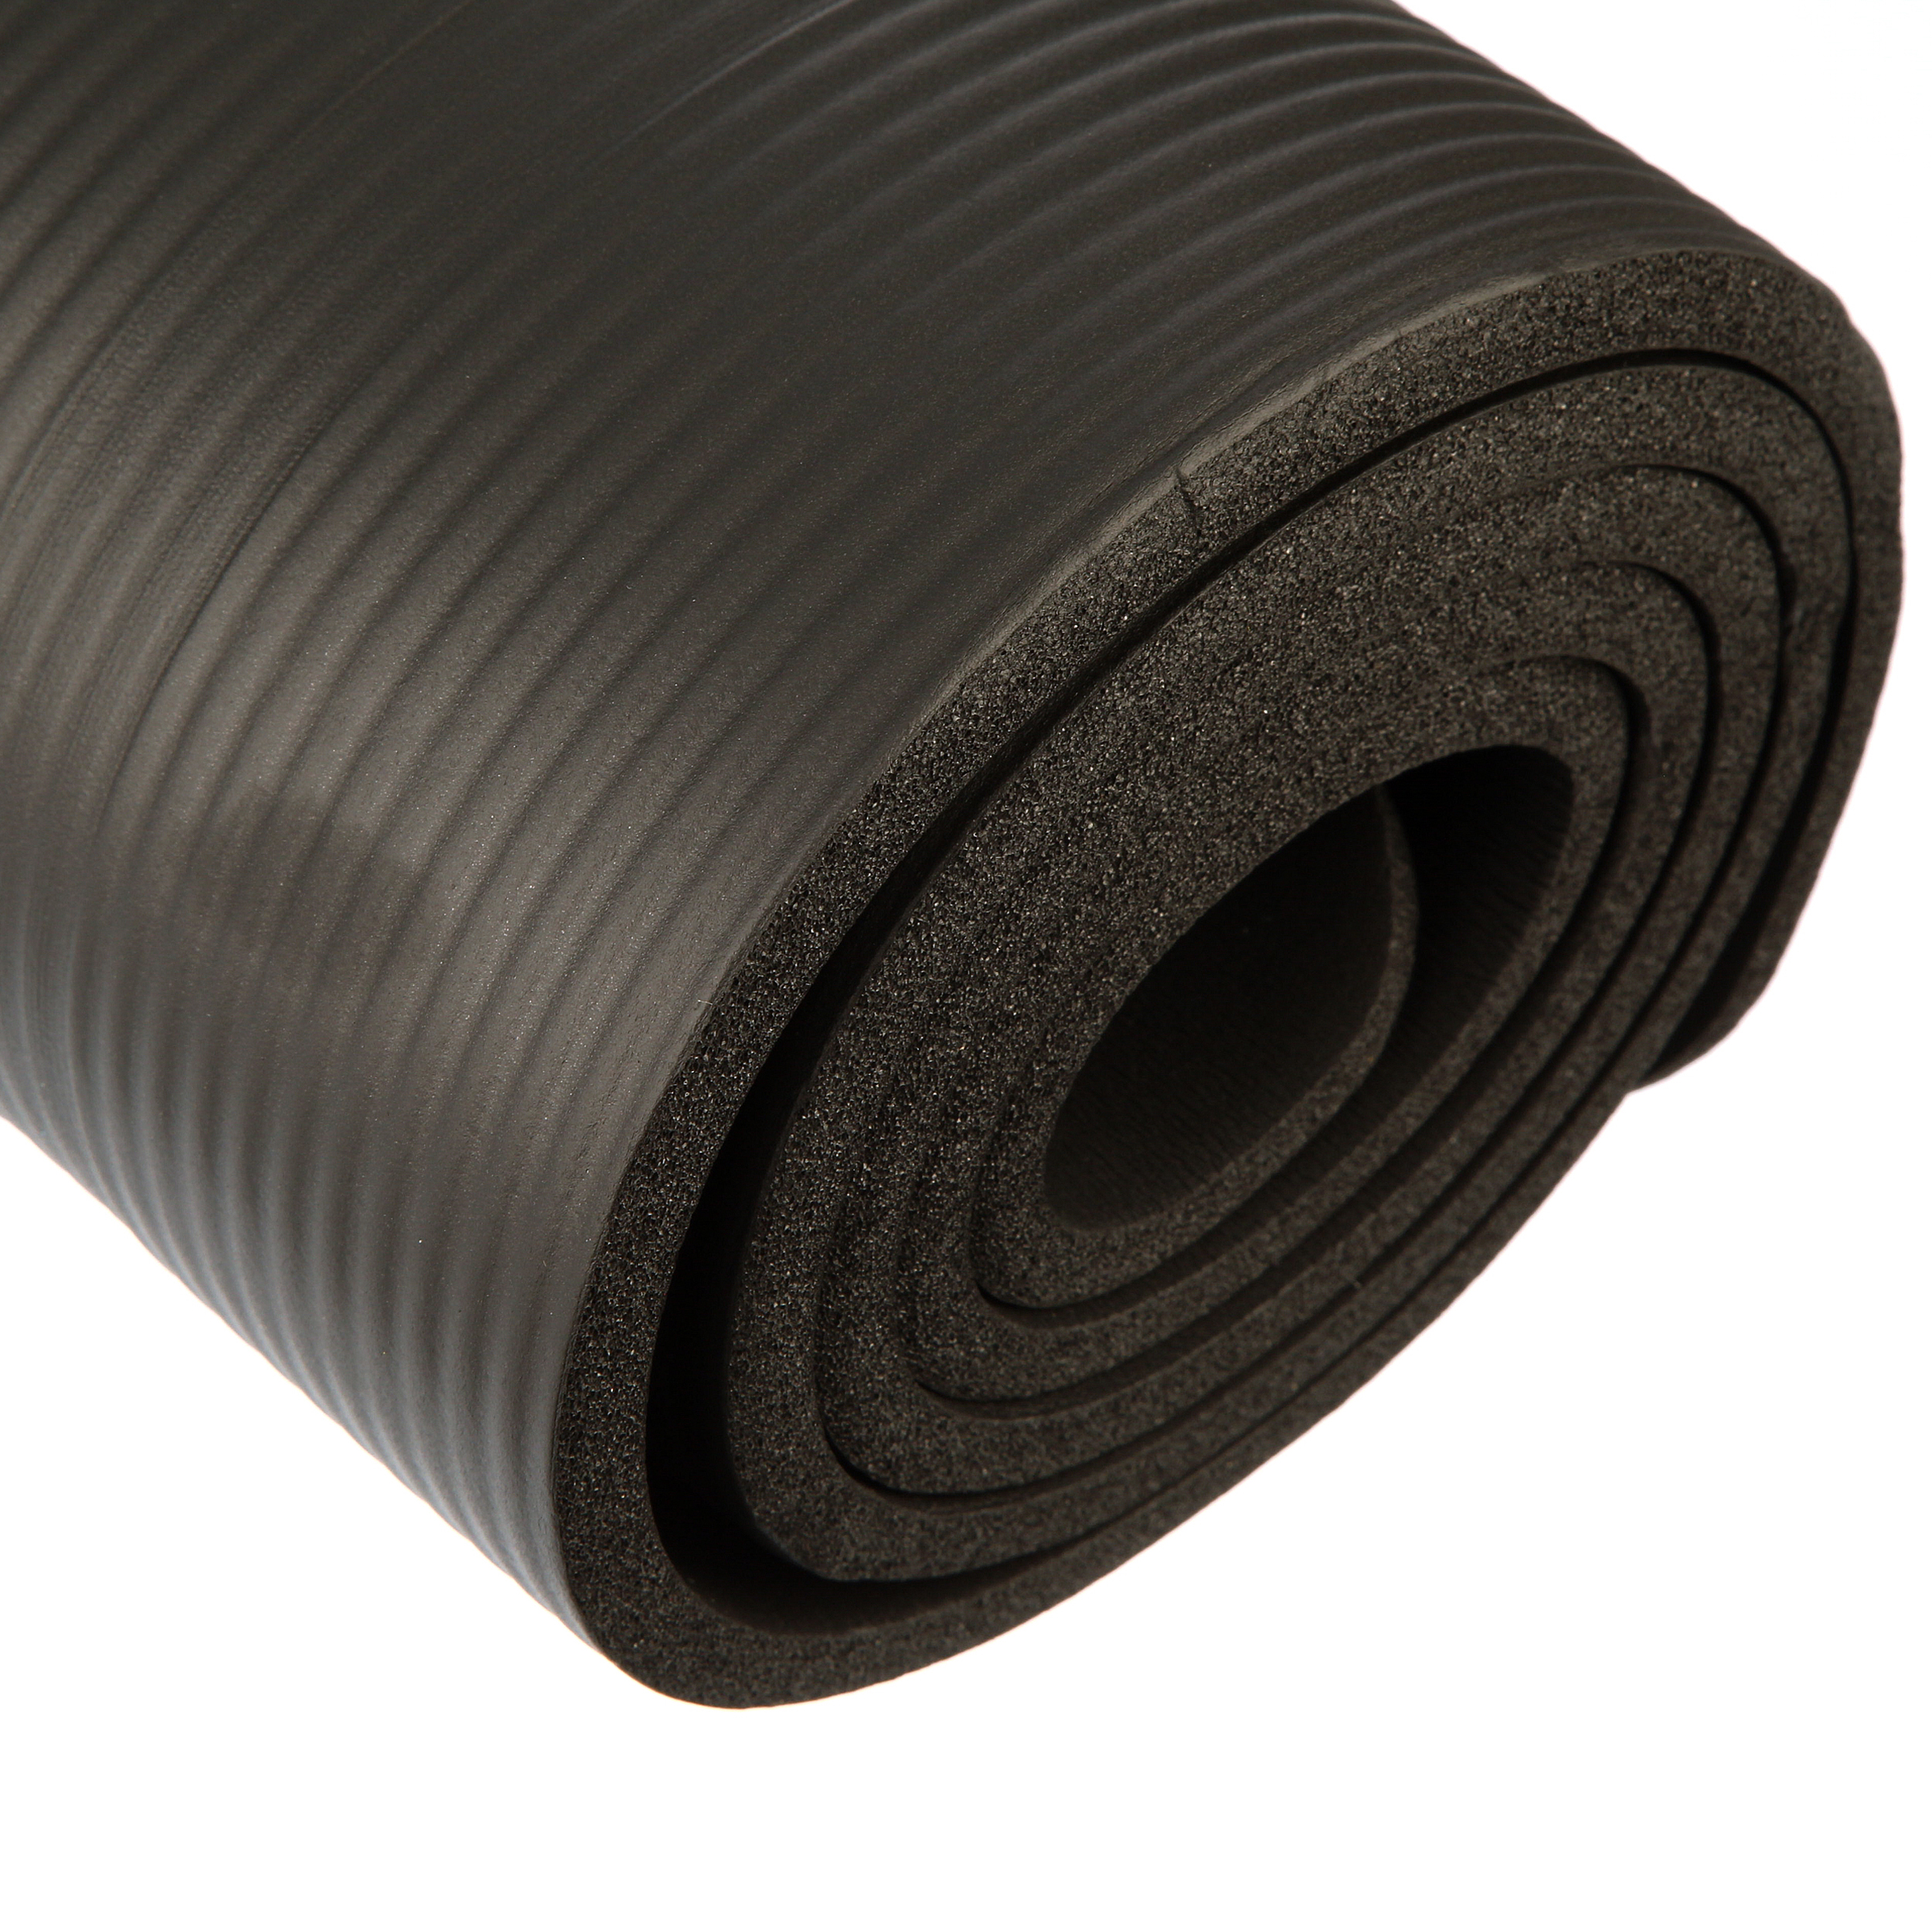 Tone Fitness NBR High Density Yoga Exercise Mat with Carry Strap, Black - image 5 of 5